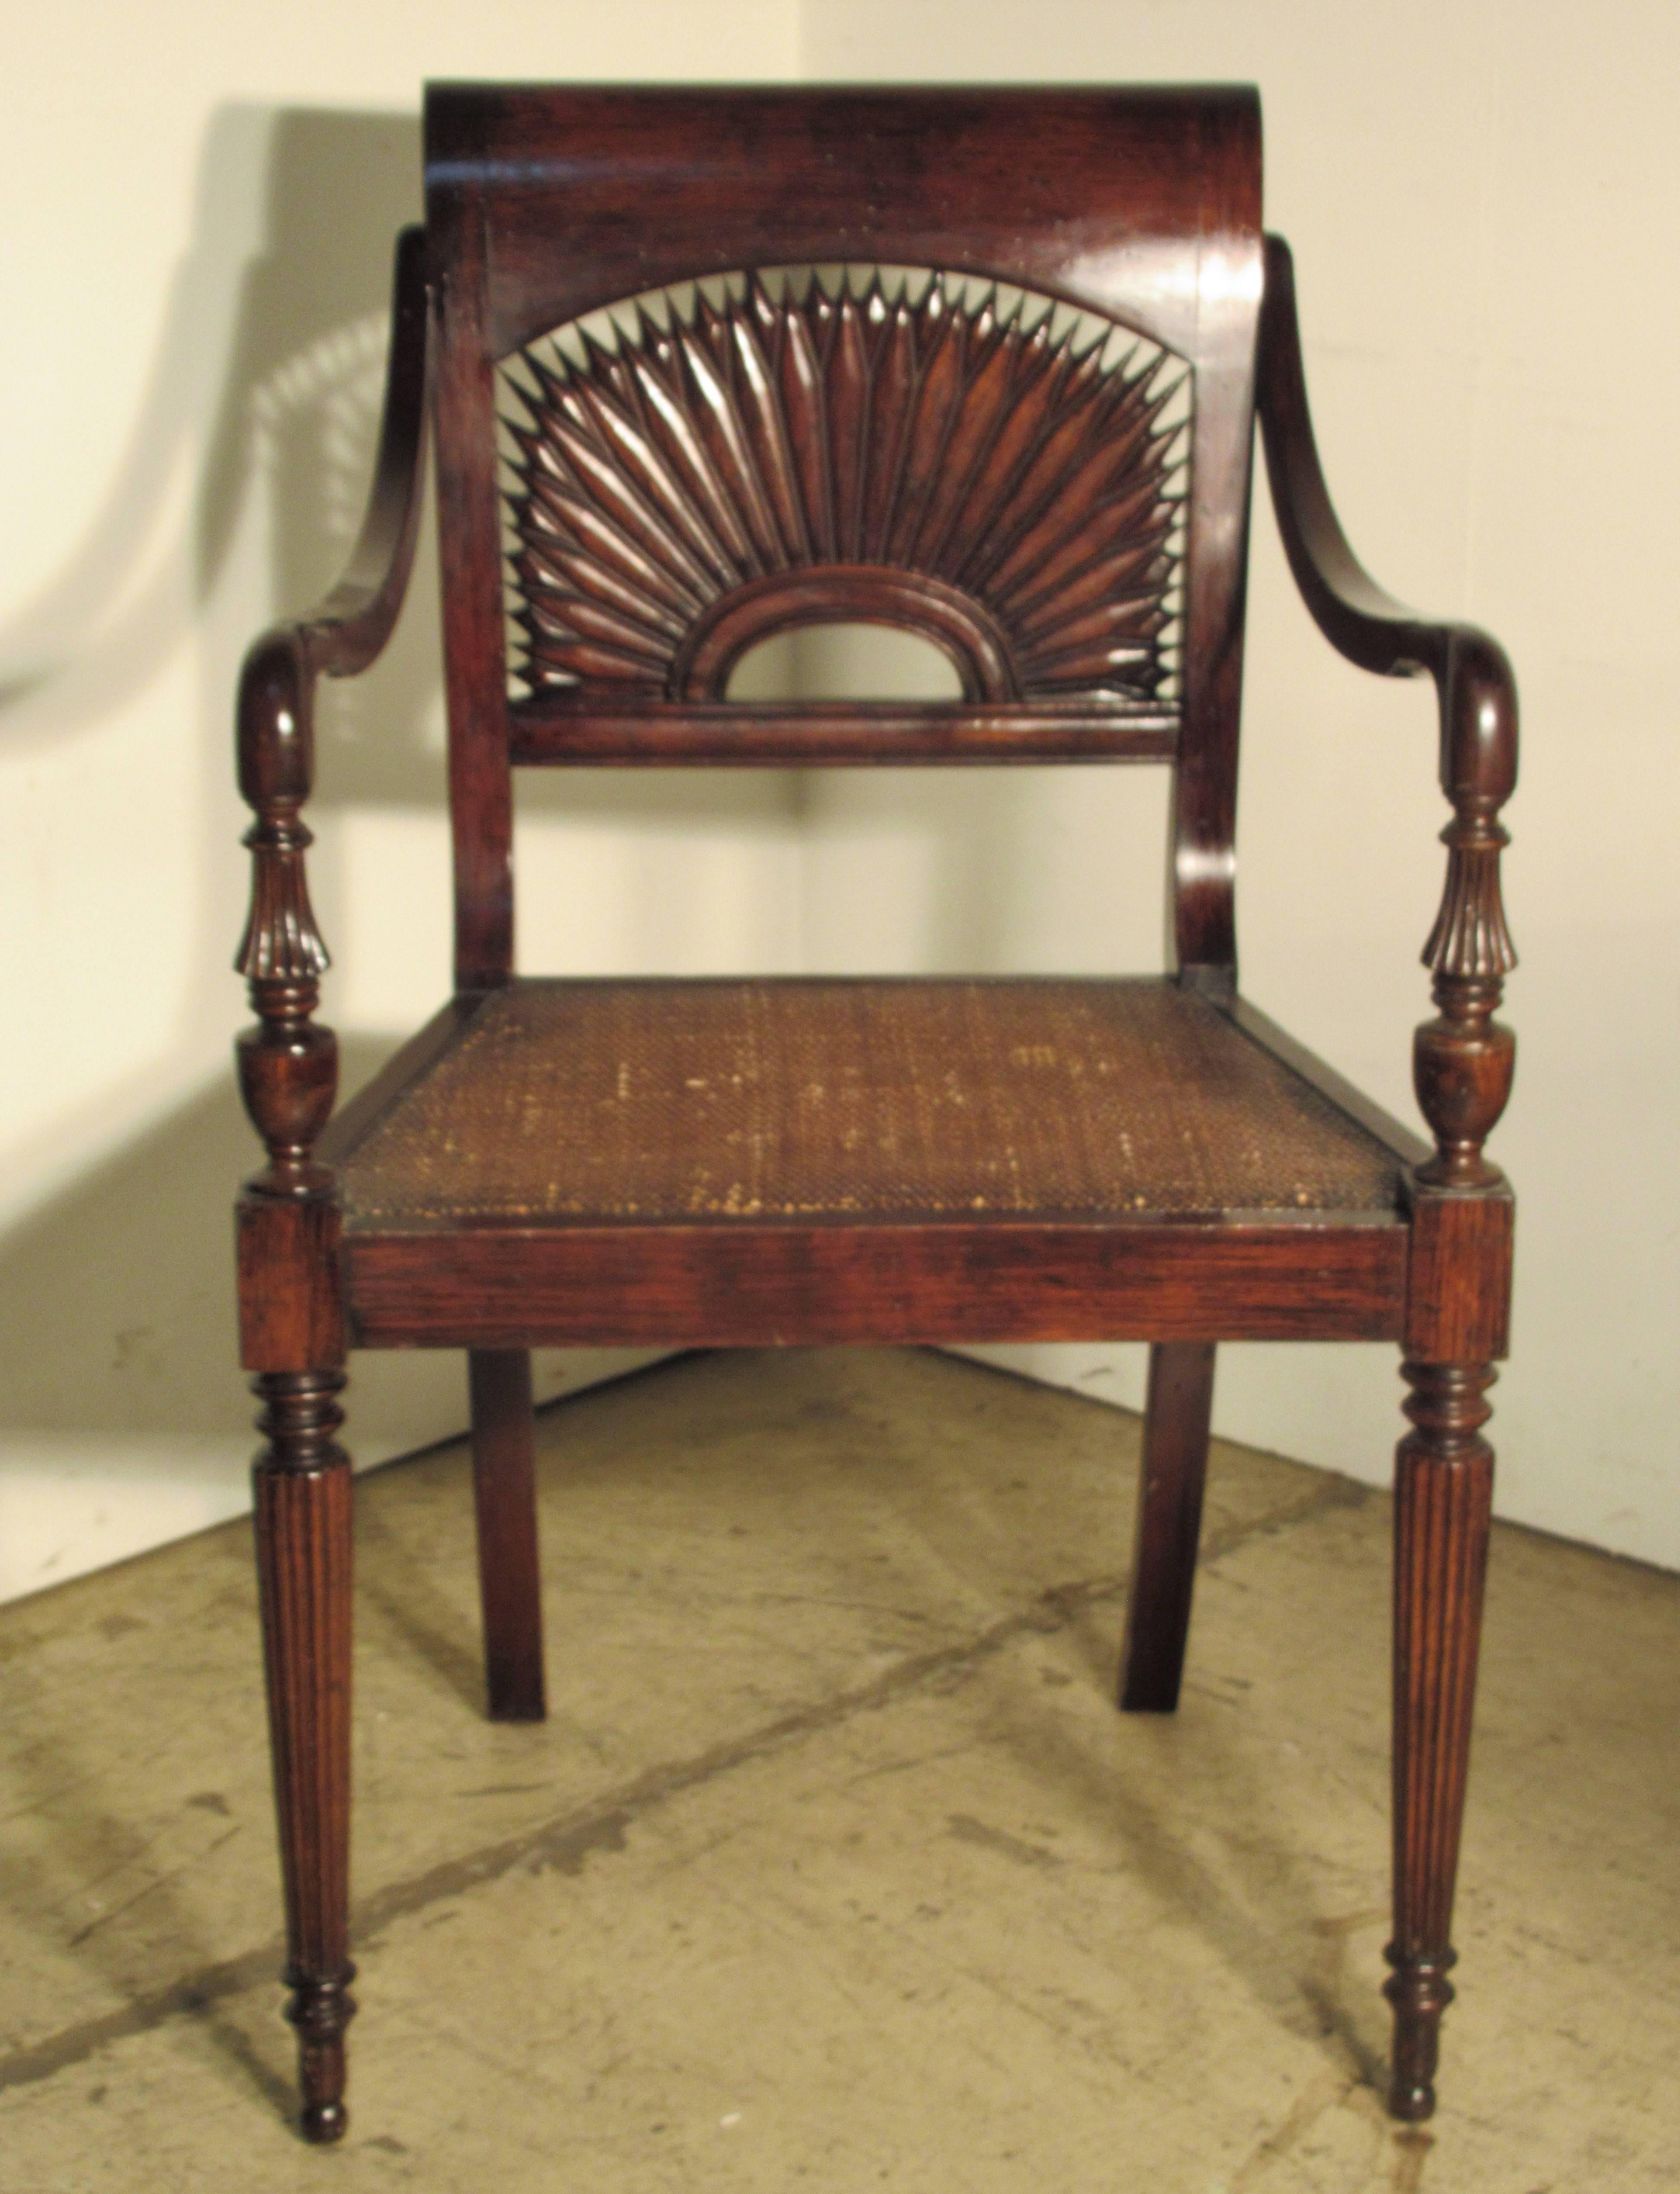 A pair of British Colonial style faux rosewood grained cane seat armchairs with finely carved sunburst backs and reeded legs. A very formal good looking design. Stamped on underside - Made in Italy, circa 1940-1960.